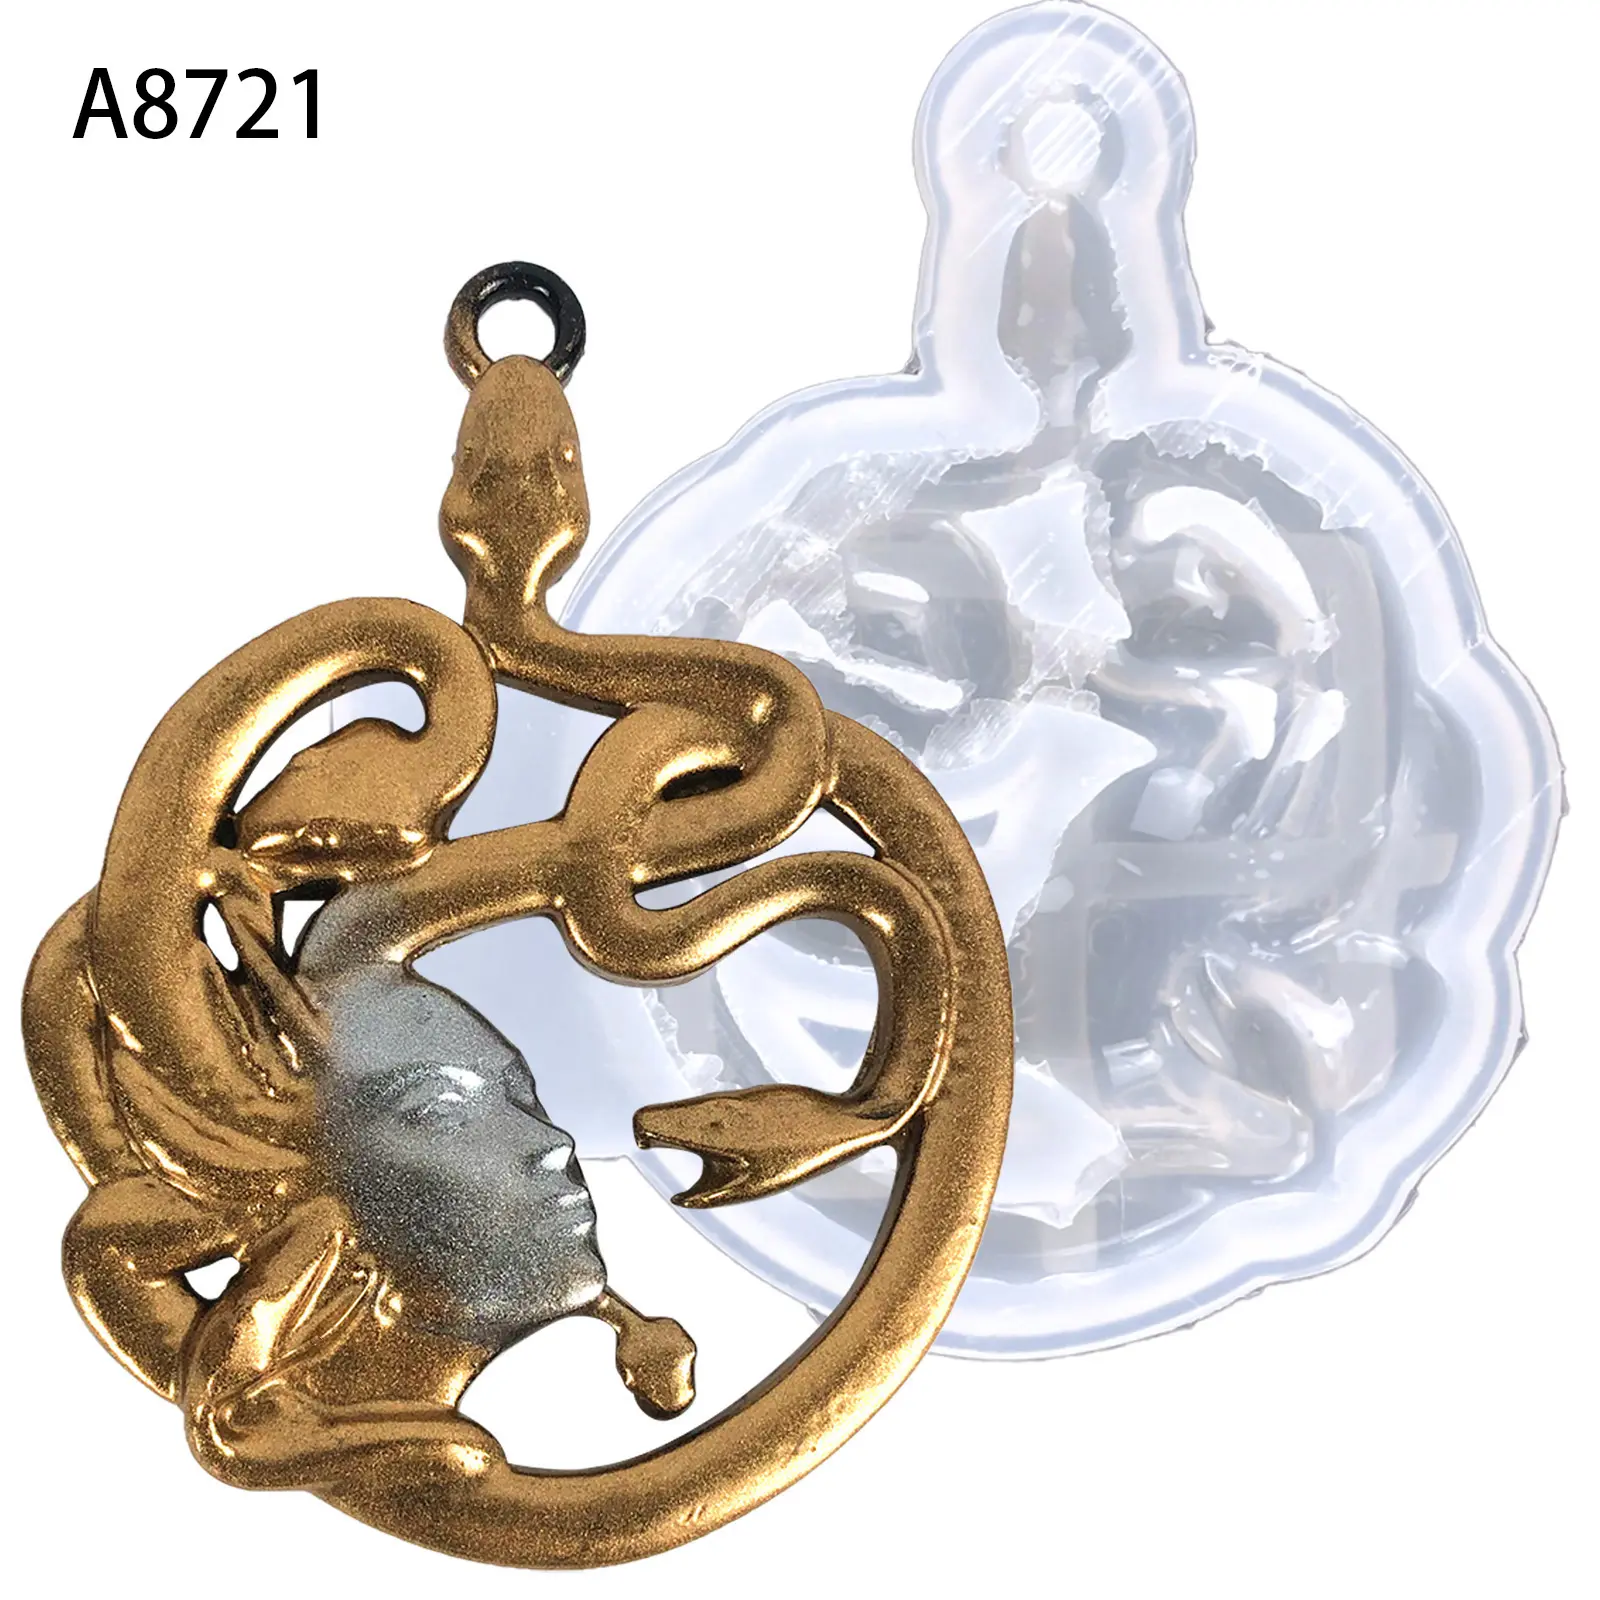 A721 Medusa keychain silicone mold silicone plaster mold making home decor